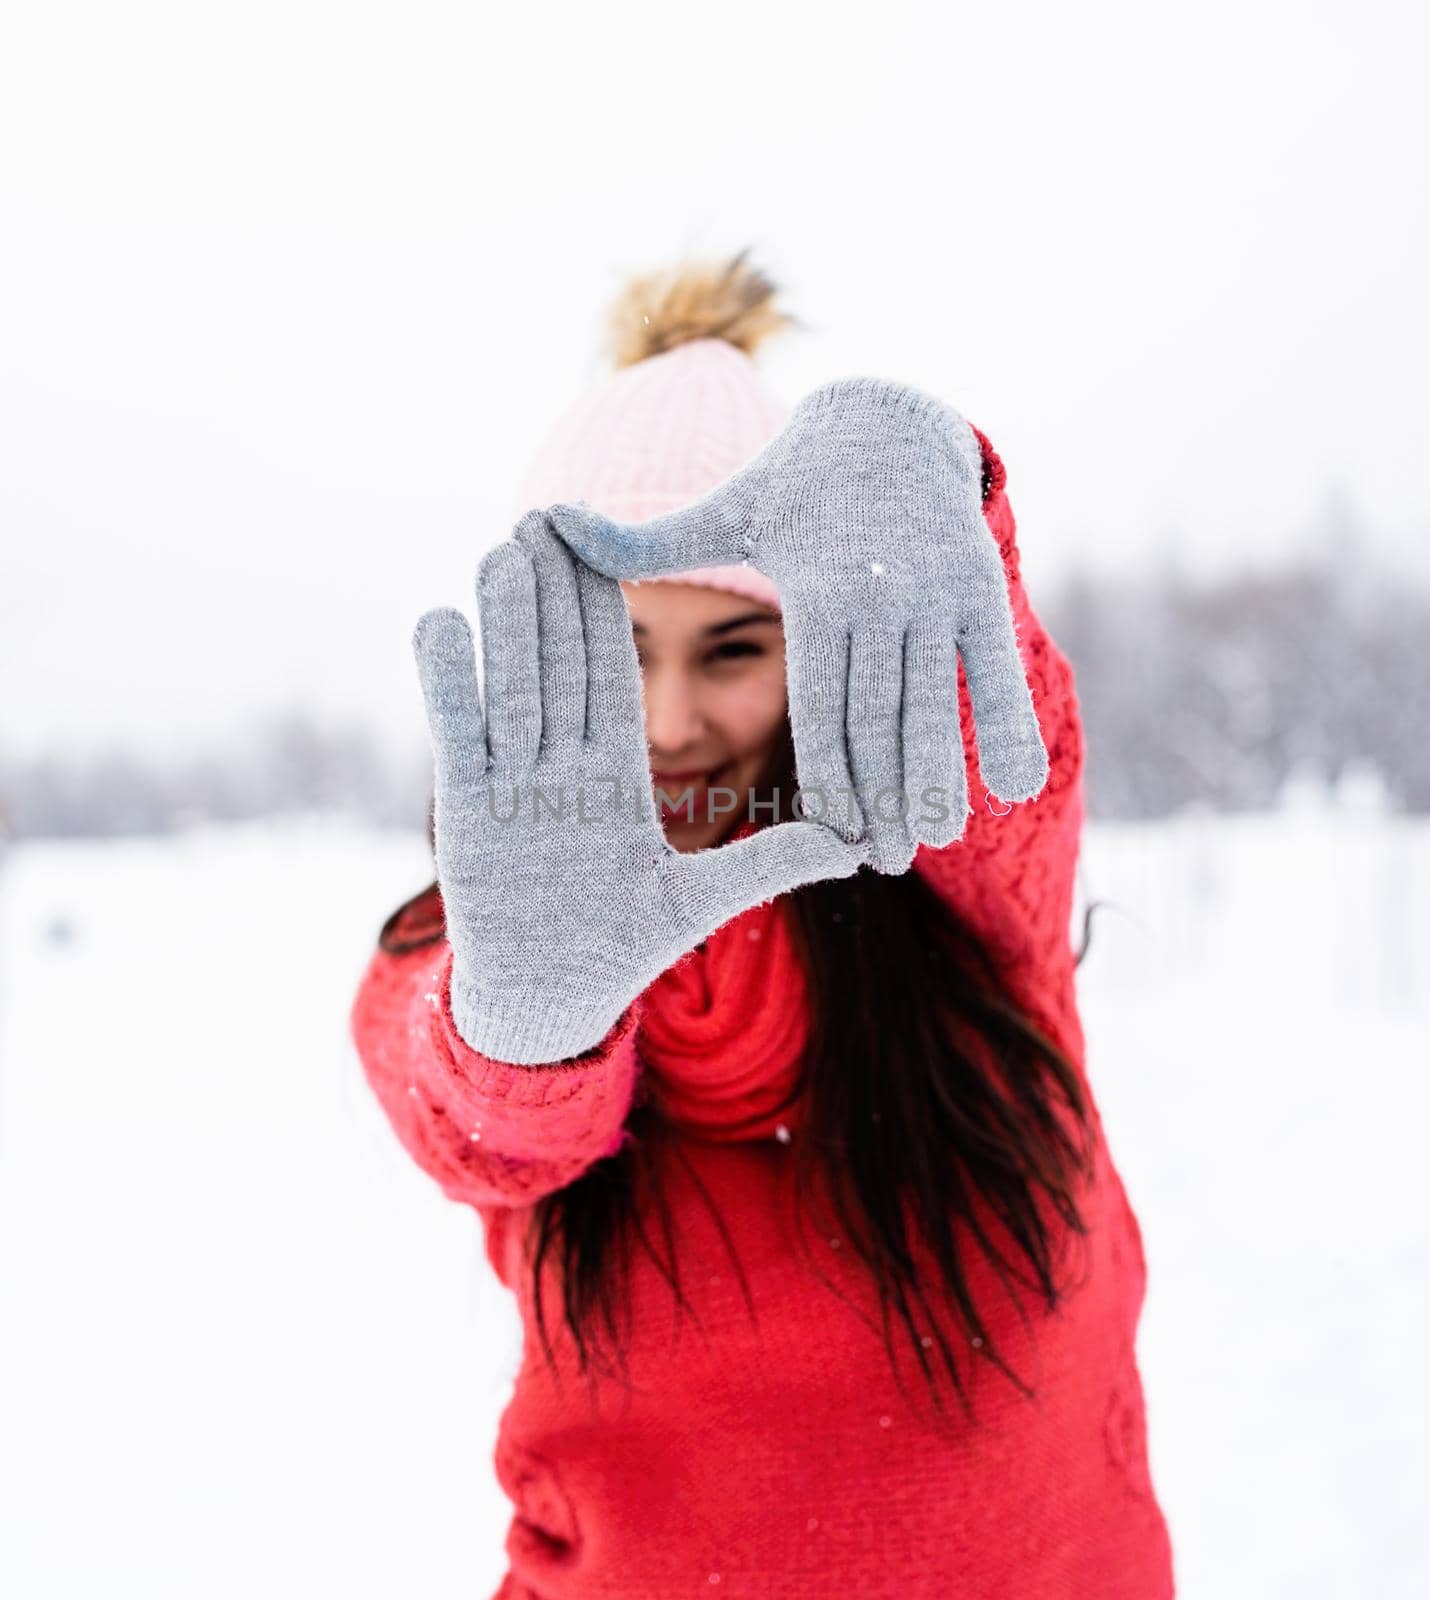 Winter season. beautiful young woman in red sweater making frame sign with her hands outdoors in snowy day